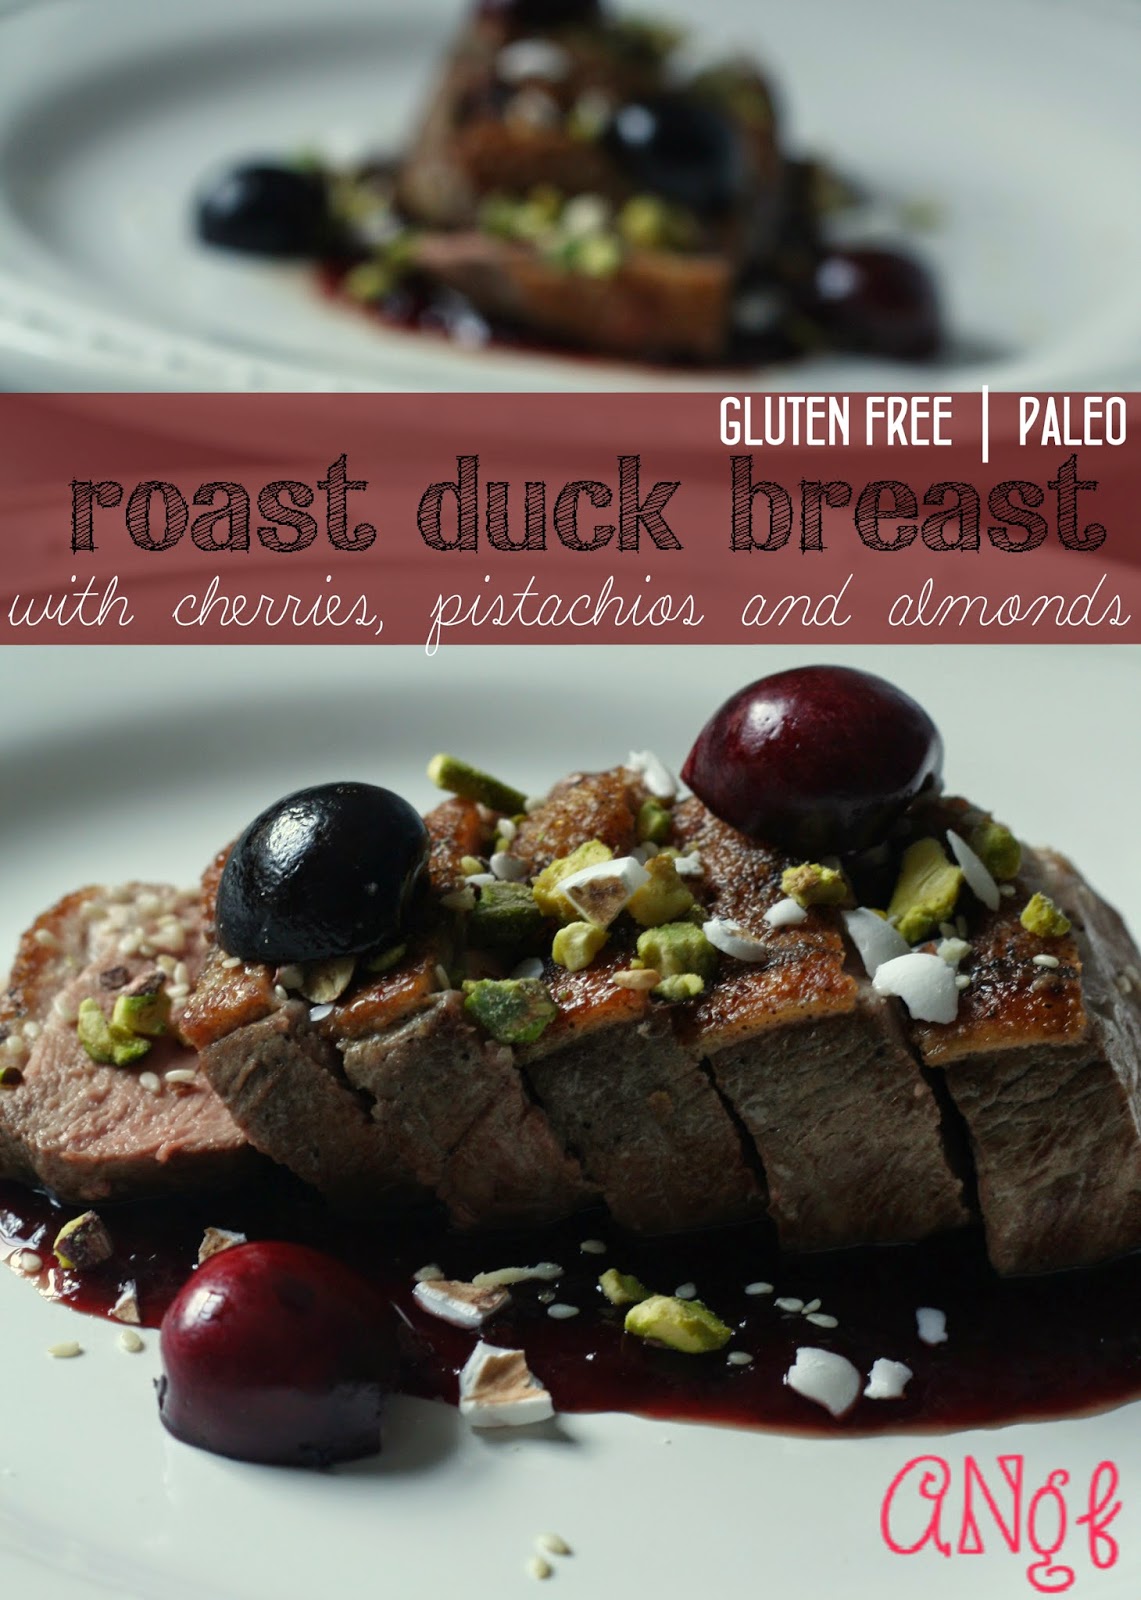 Gluten Free Paleo Roast Duck Breast with Cheries, Pistachios & Almonds from Anyonita-nibbles.co.uk